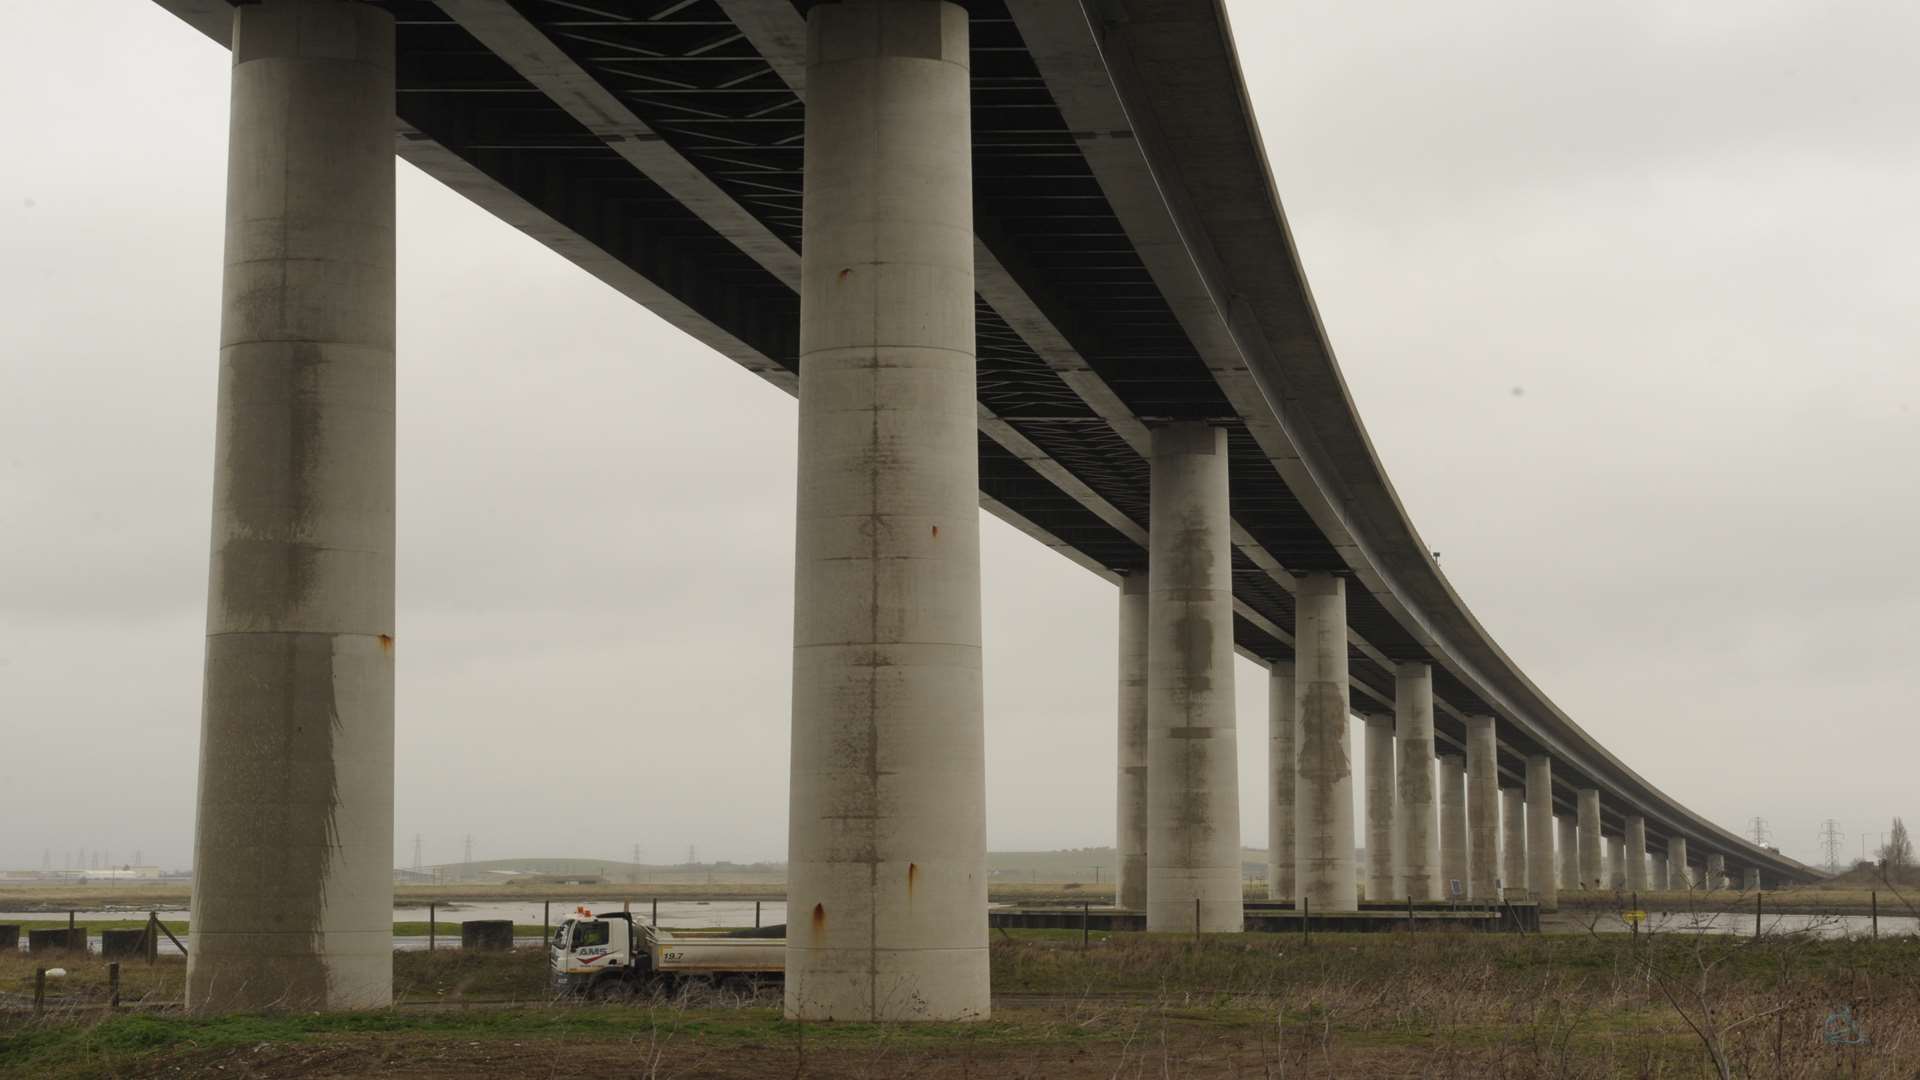 Woodhams said he planned to drive off the Sheppey Crossing